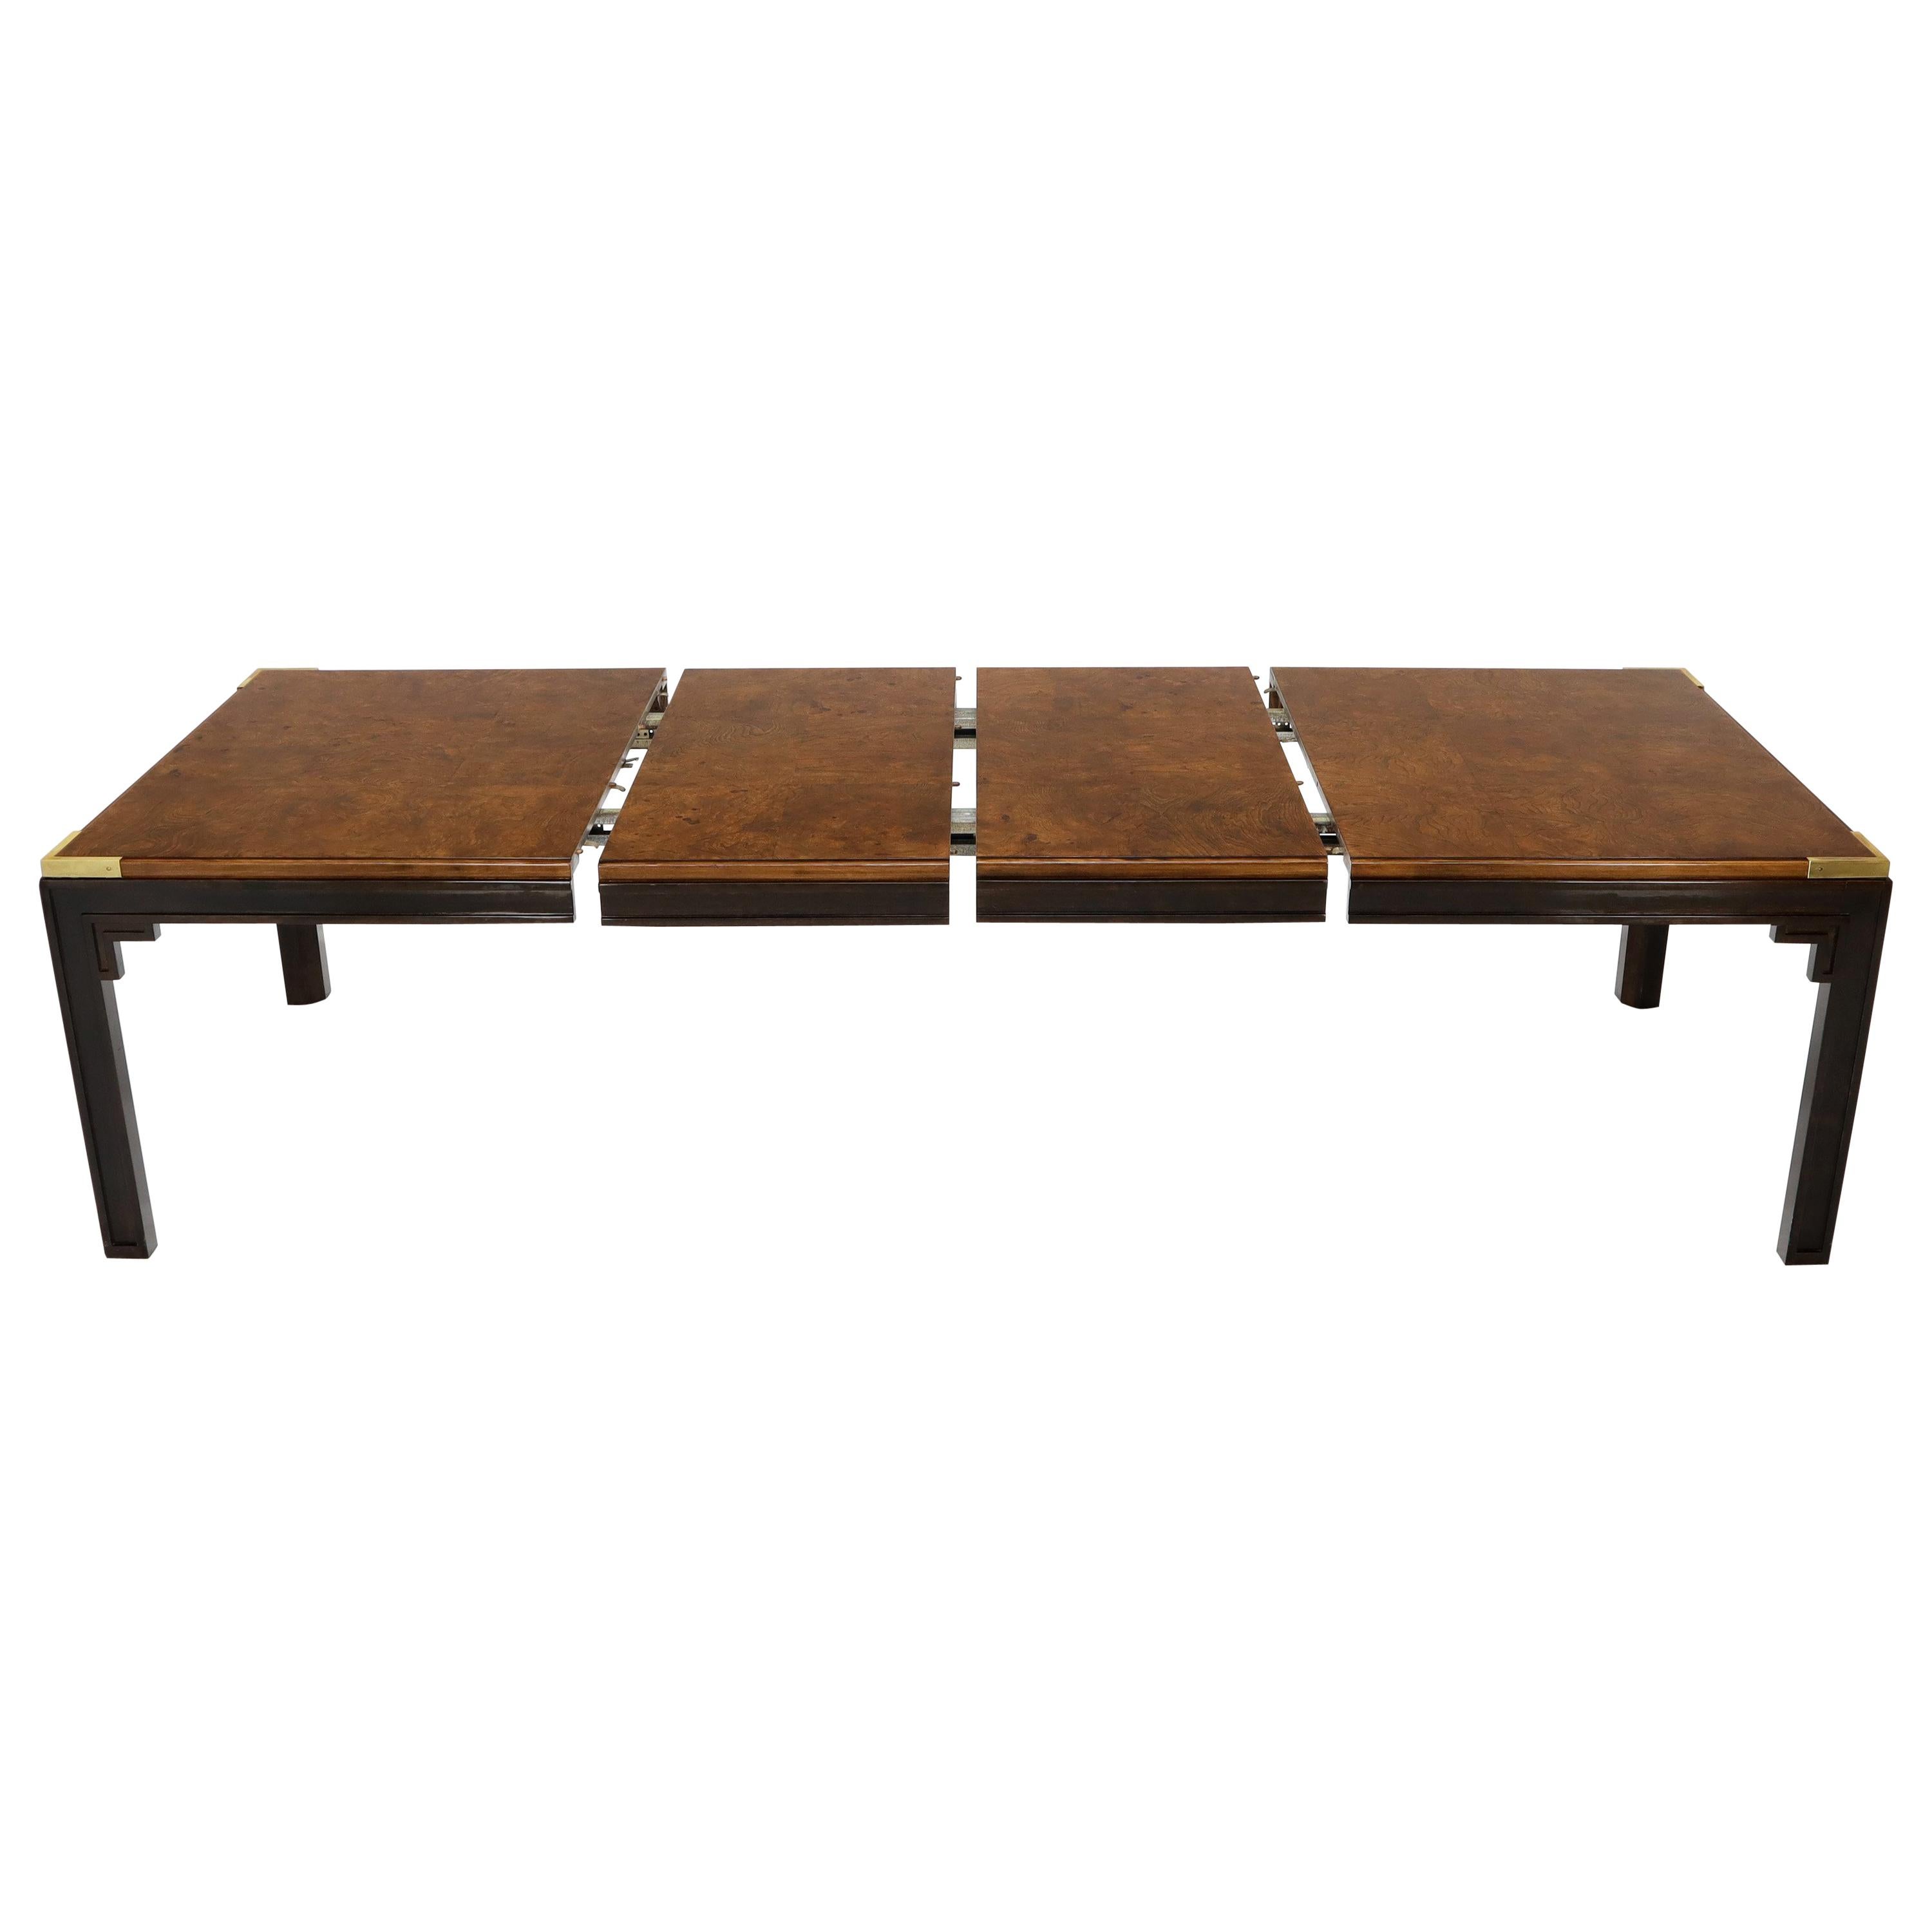 Large Burlwood Dining Table with Brass Accents and Two Extension Leaves Boards